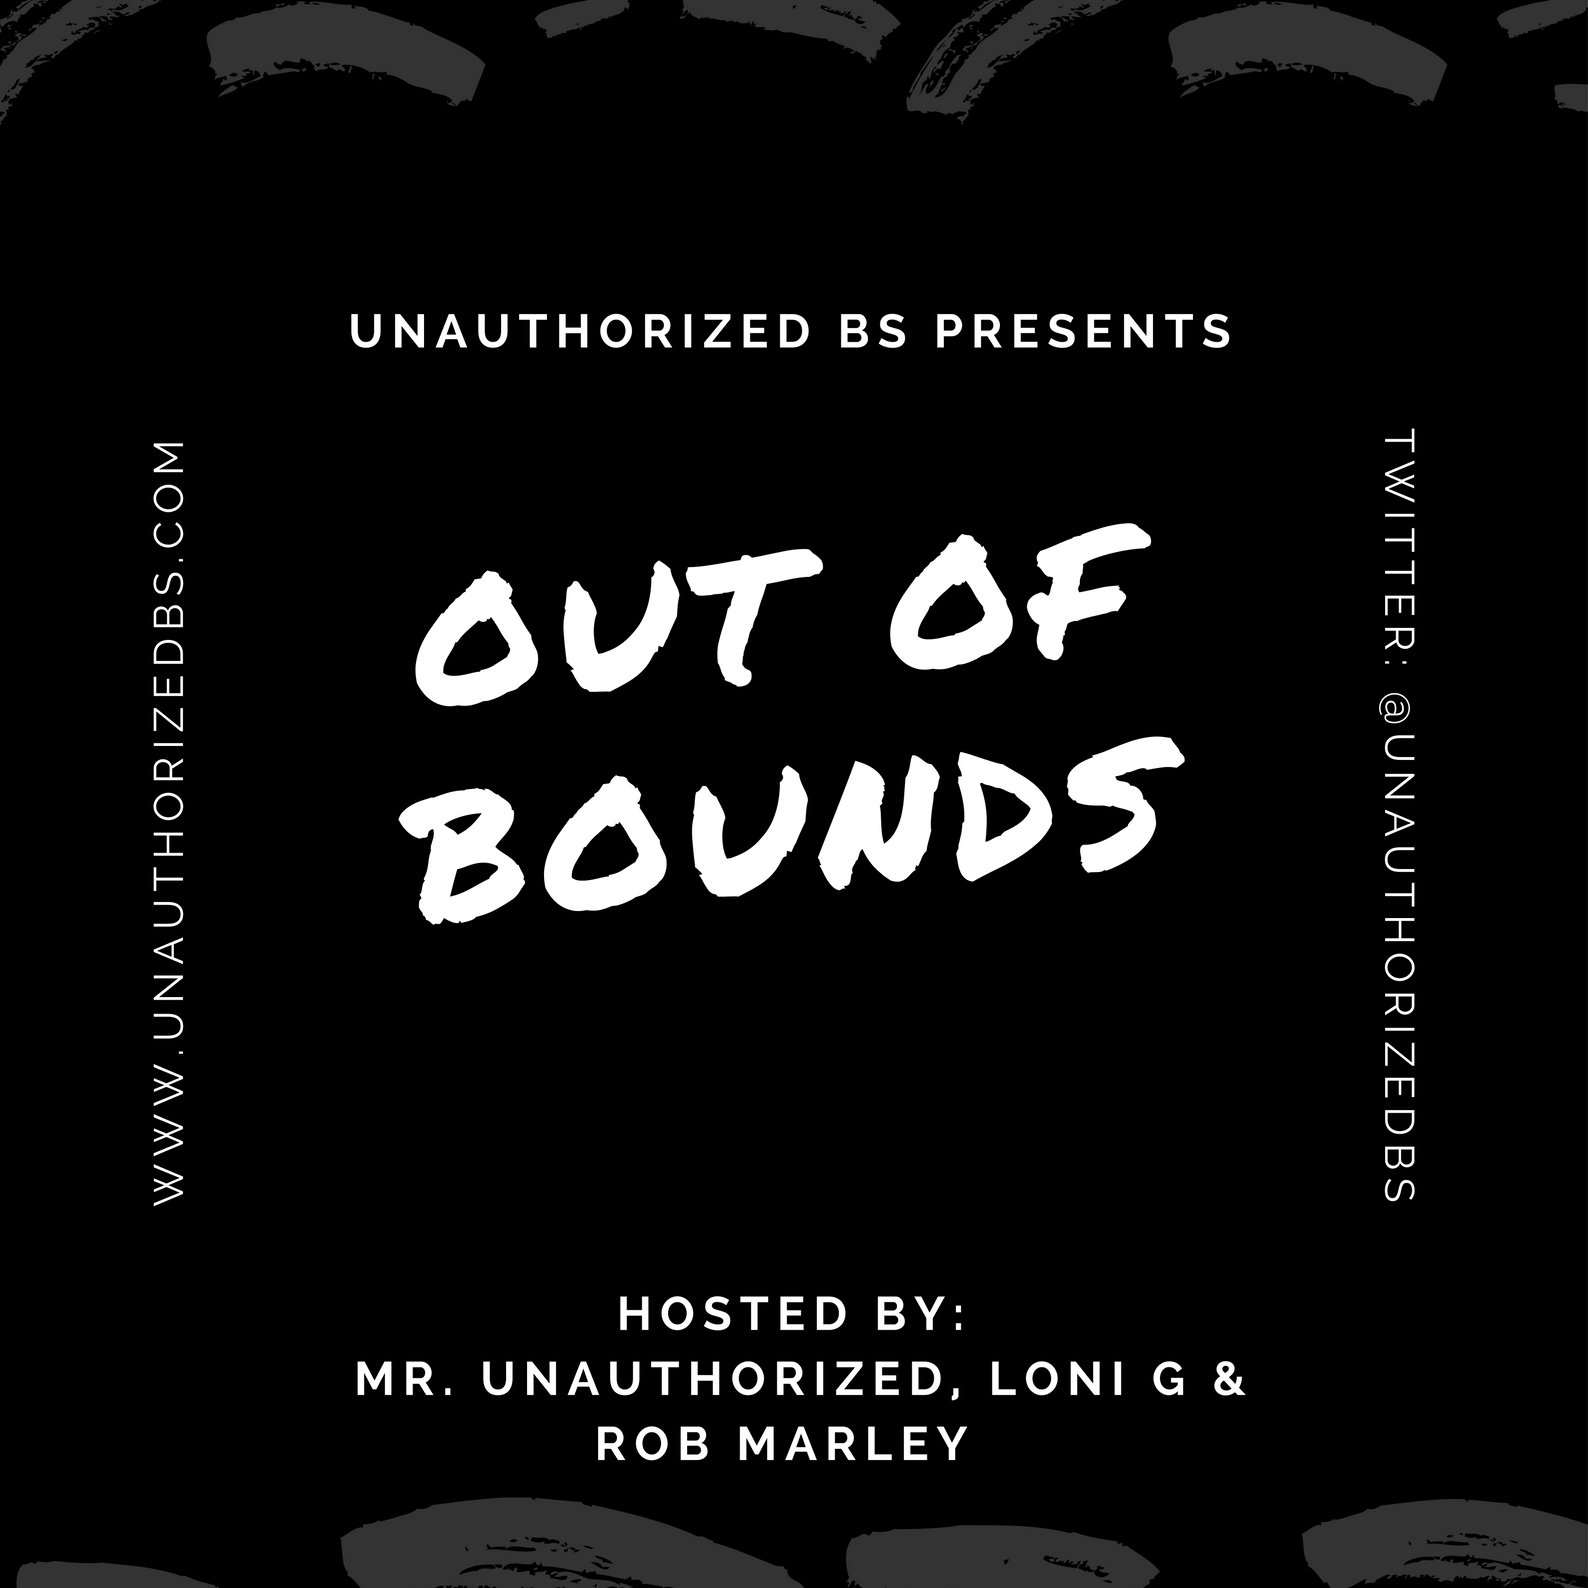 UnAuthorized BS presents Out of Bounds. The sports podcast that everyone has been waiting on. *Podcast and Site being unveiled soon. Stay tuned for updates!